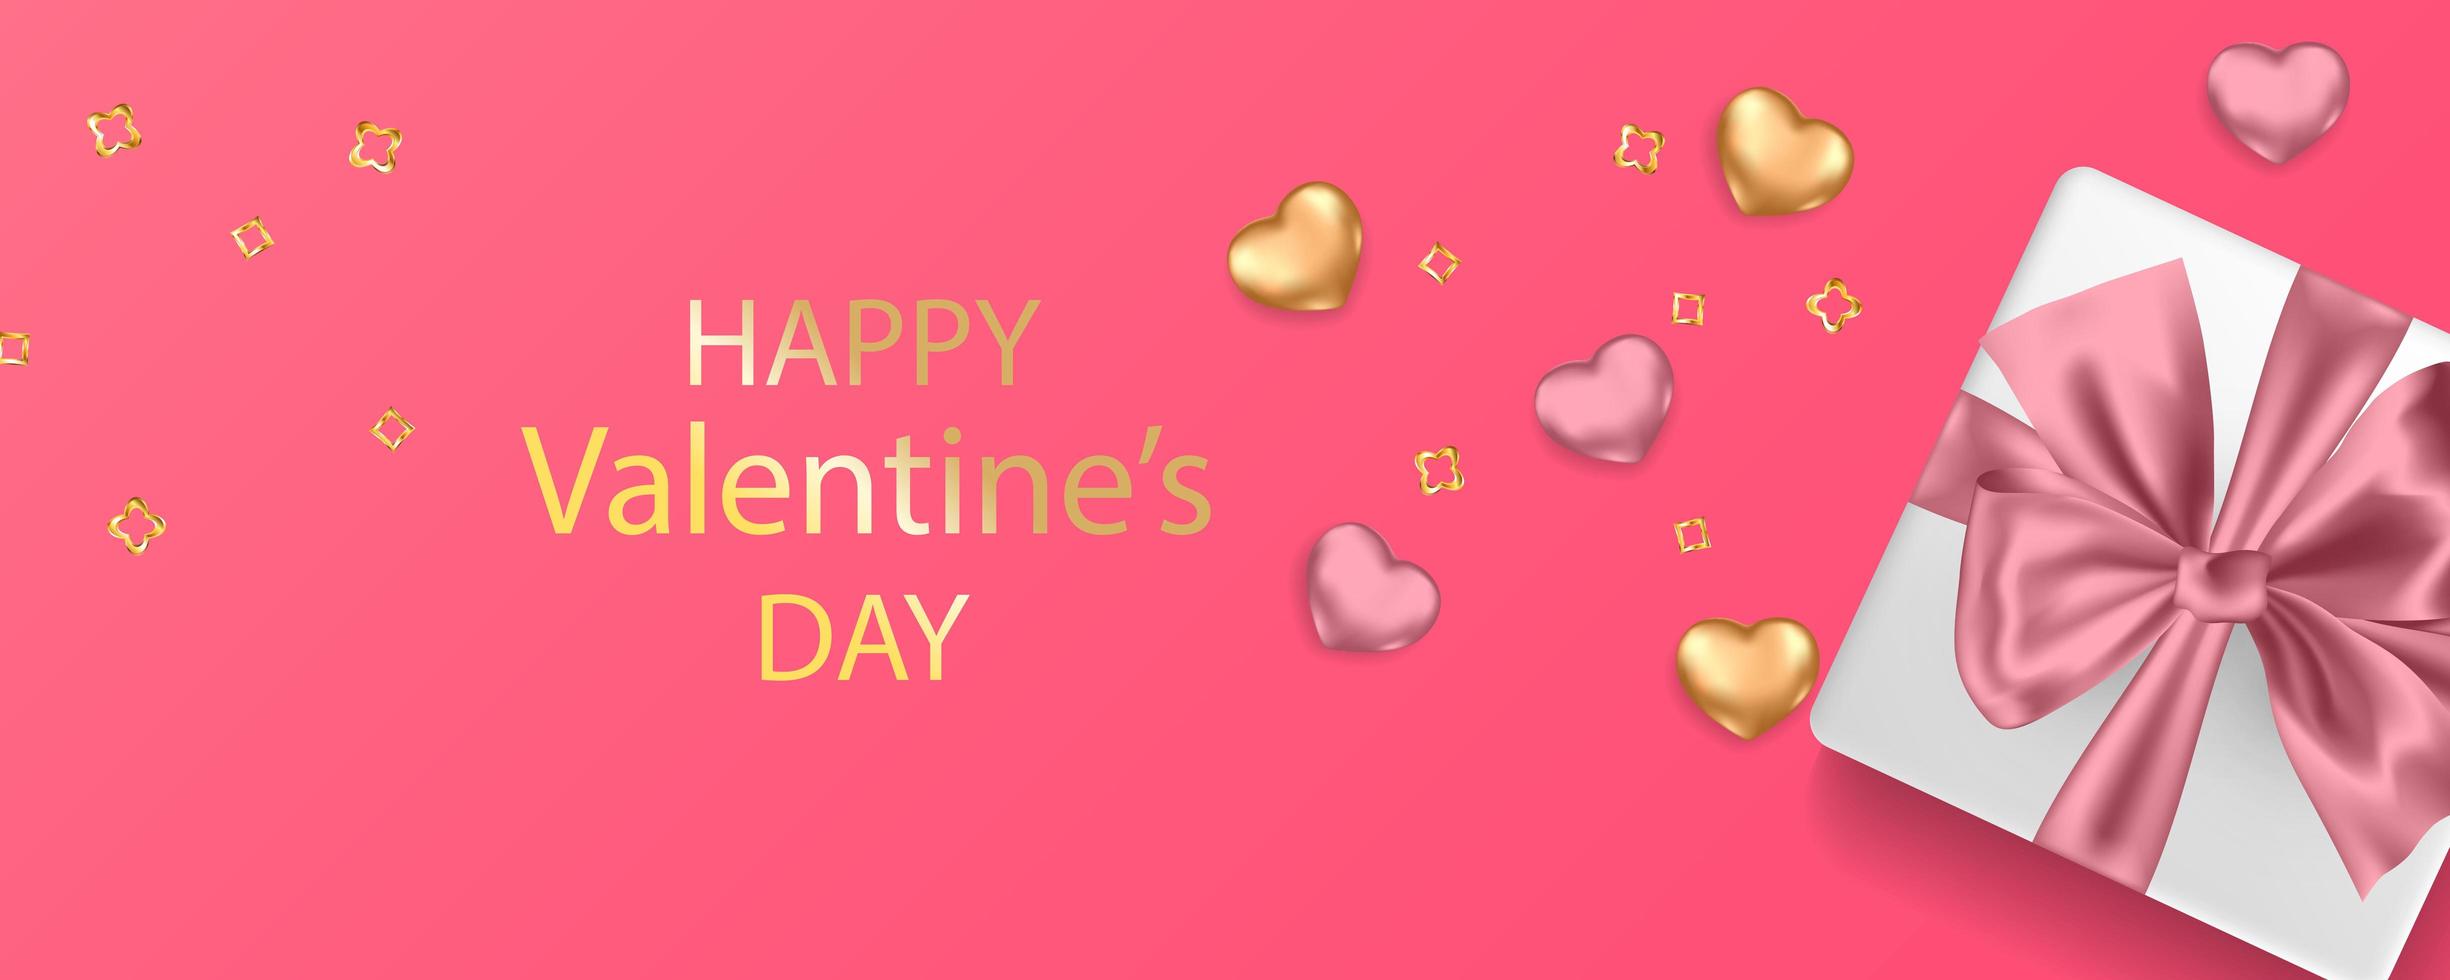 Valentines day card concept vector